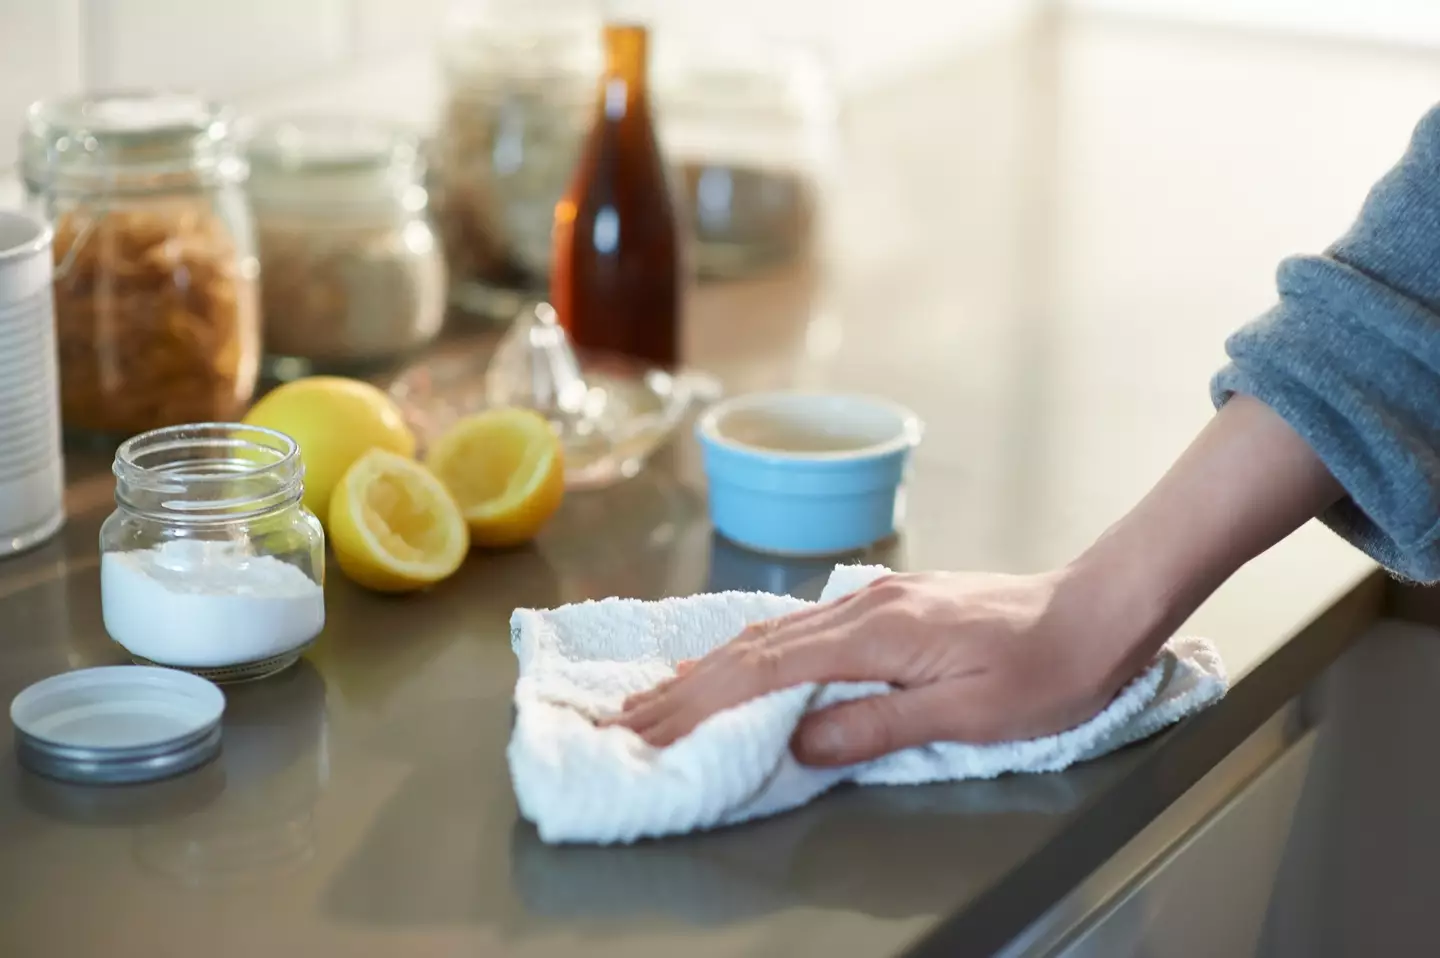 Vinegar can come in as a great cleaning ingredient.